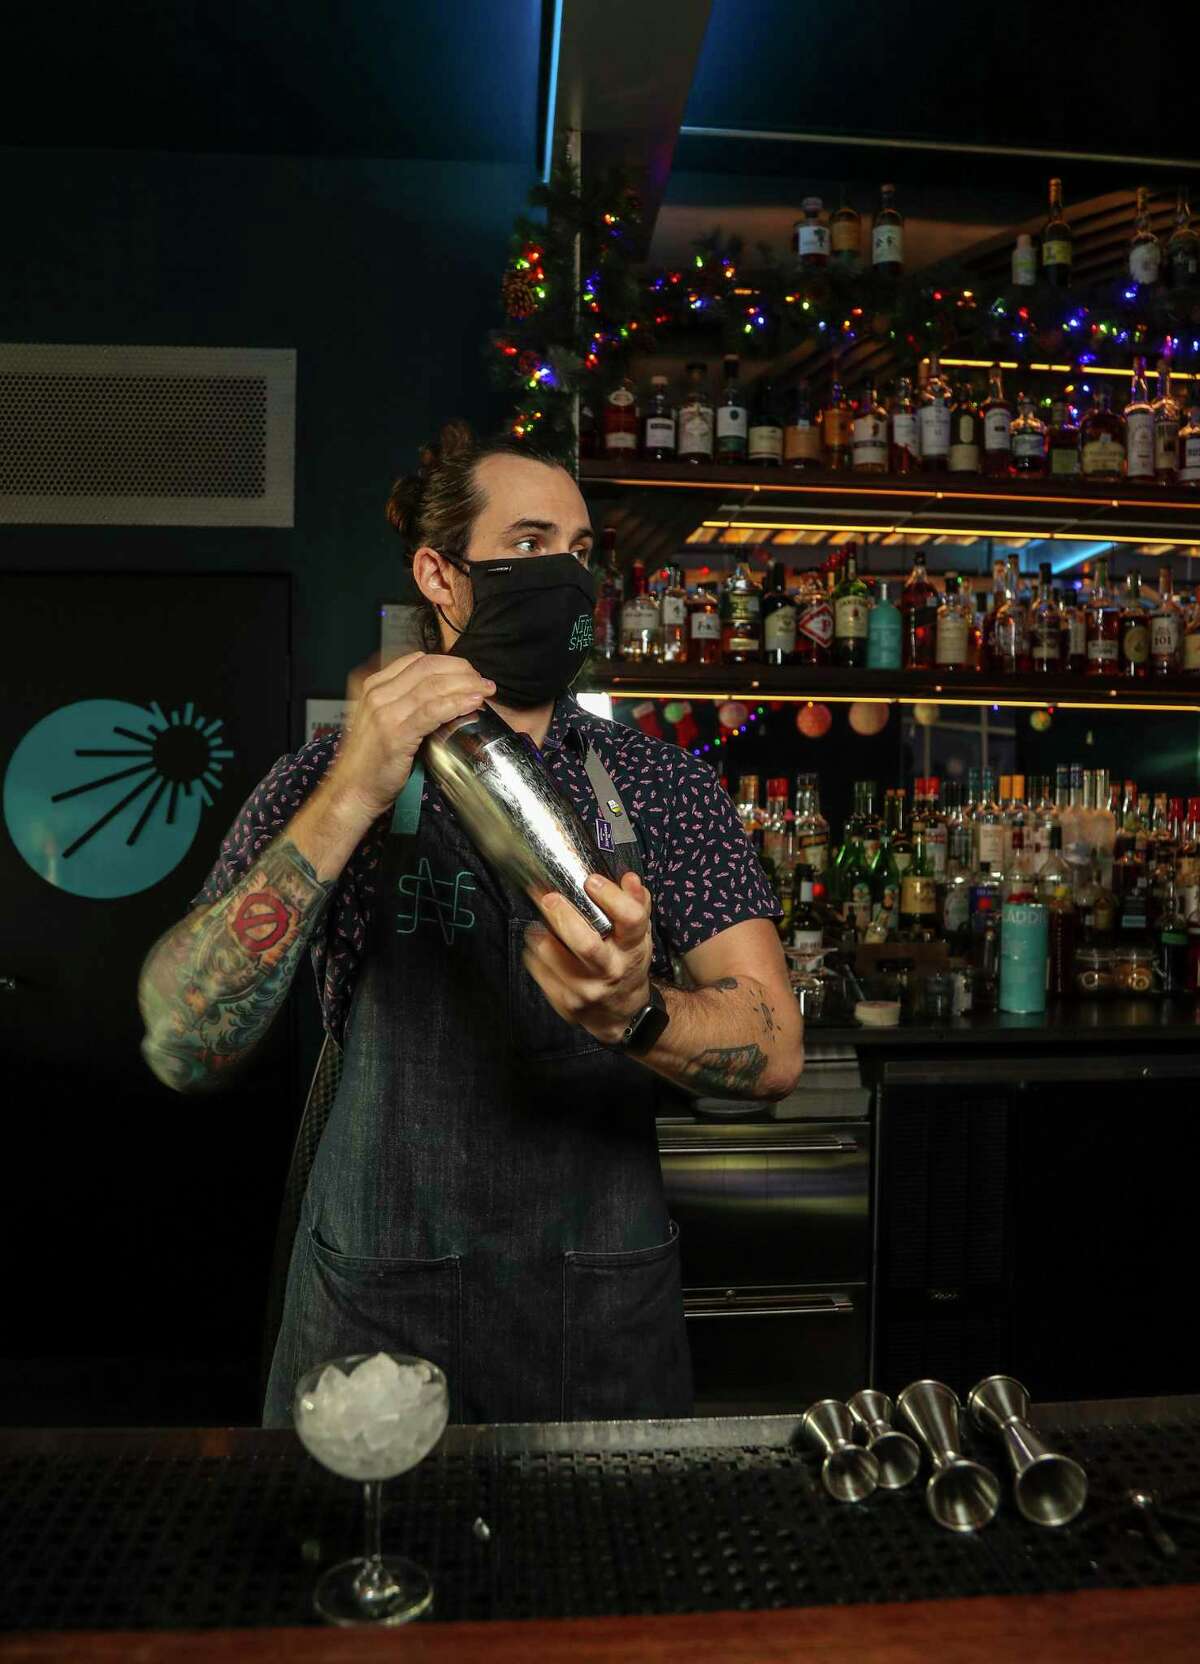 Justin Ware, operating partner of Night Shift at 3501 Harrisburg makes a “Clothed and Normal”, a non-alcoholic cocktail, made with Giffard apertitif Sirop, seedlip citrus, lemon, orange jam, spices and sparkling water at Night Shift, Thursday, Dec. 30, 2021 in Houston. Is Houston's bar scene sober-friendly? It's hit and miss out there if you're not drinking alcohol, but Night Shift in the East End is a bar that's leading the charge with a robust booze-free cocktail program.